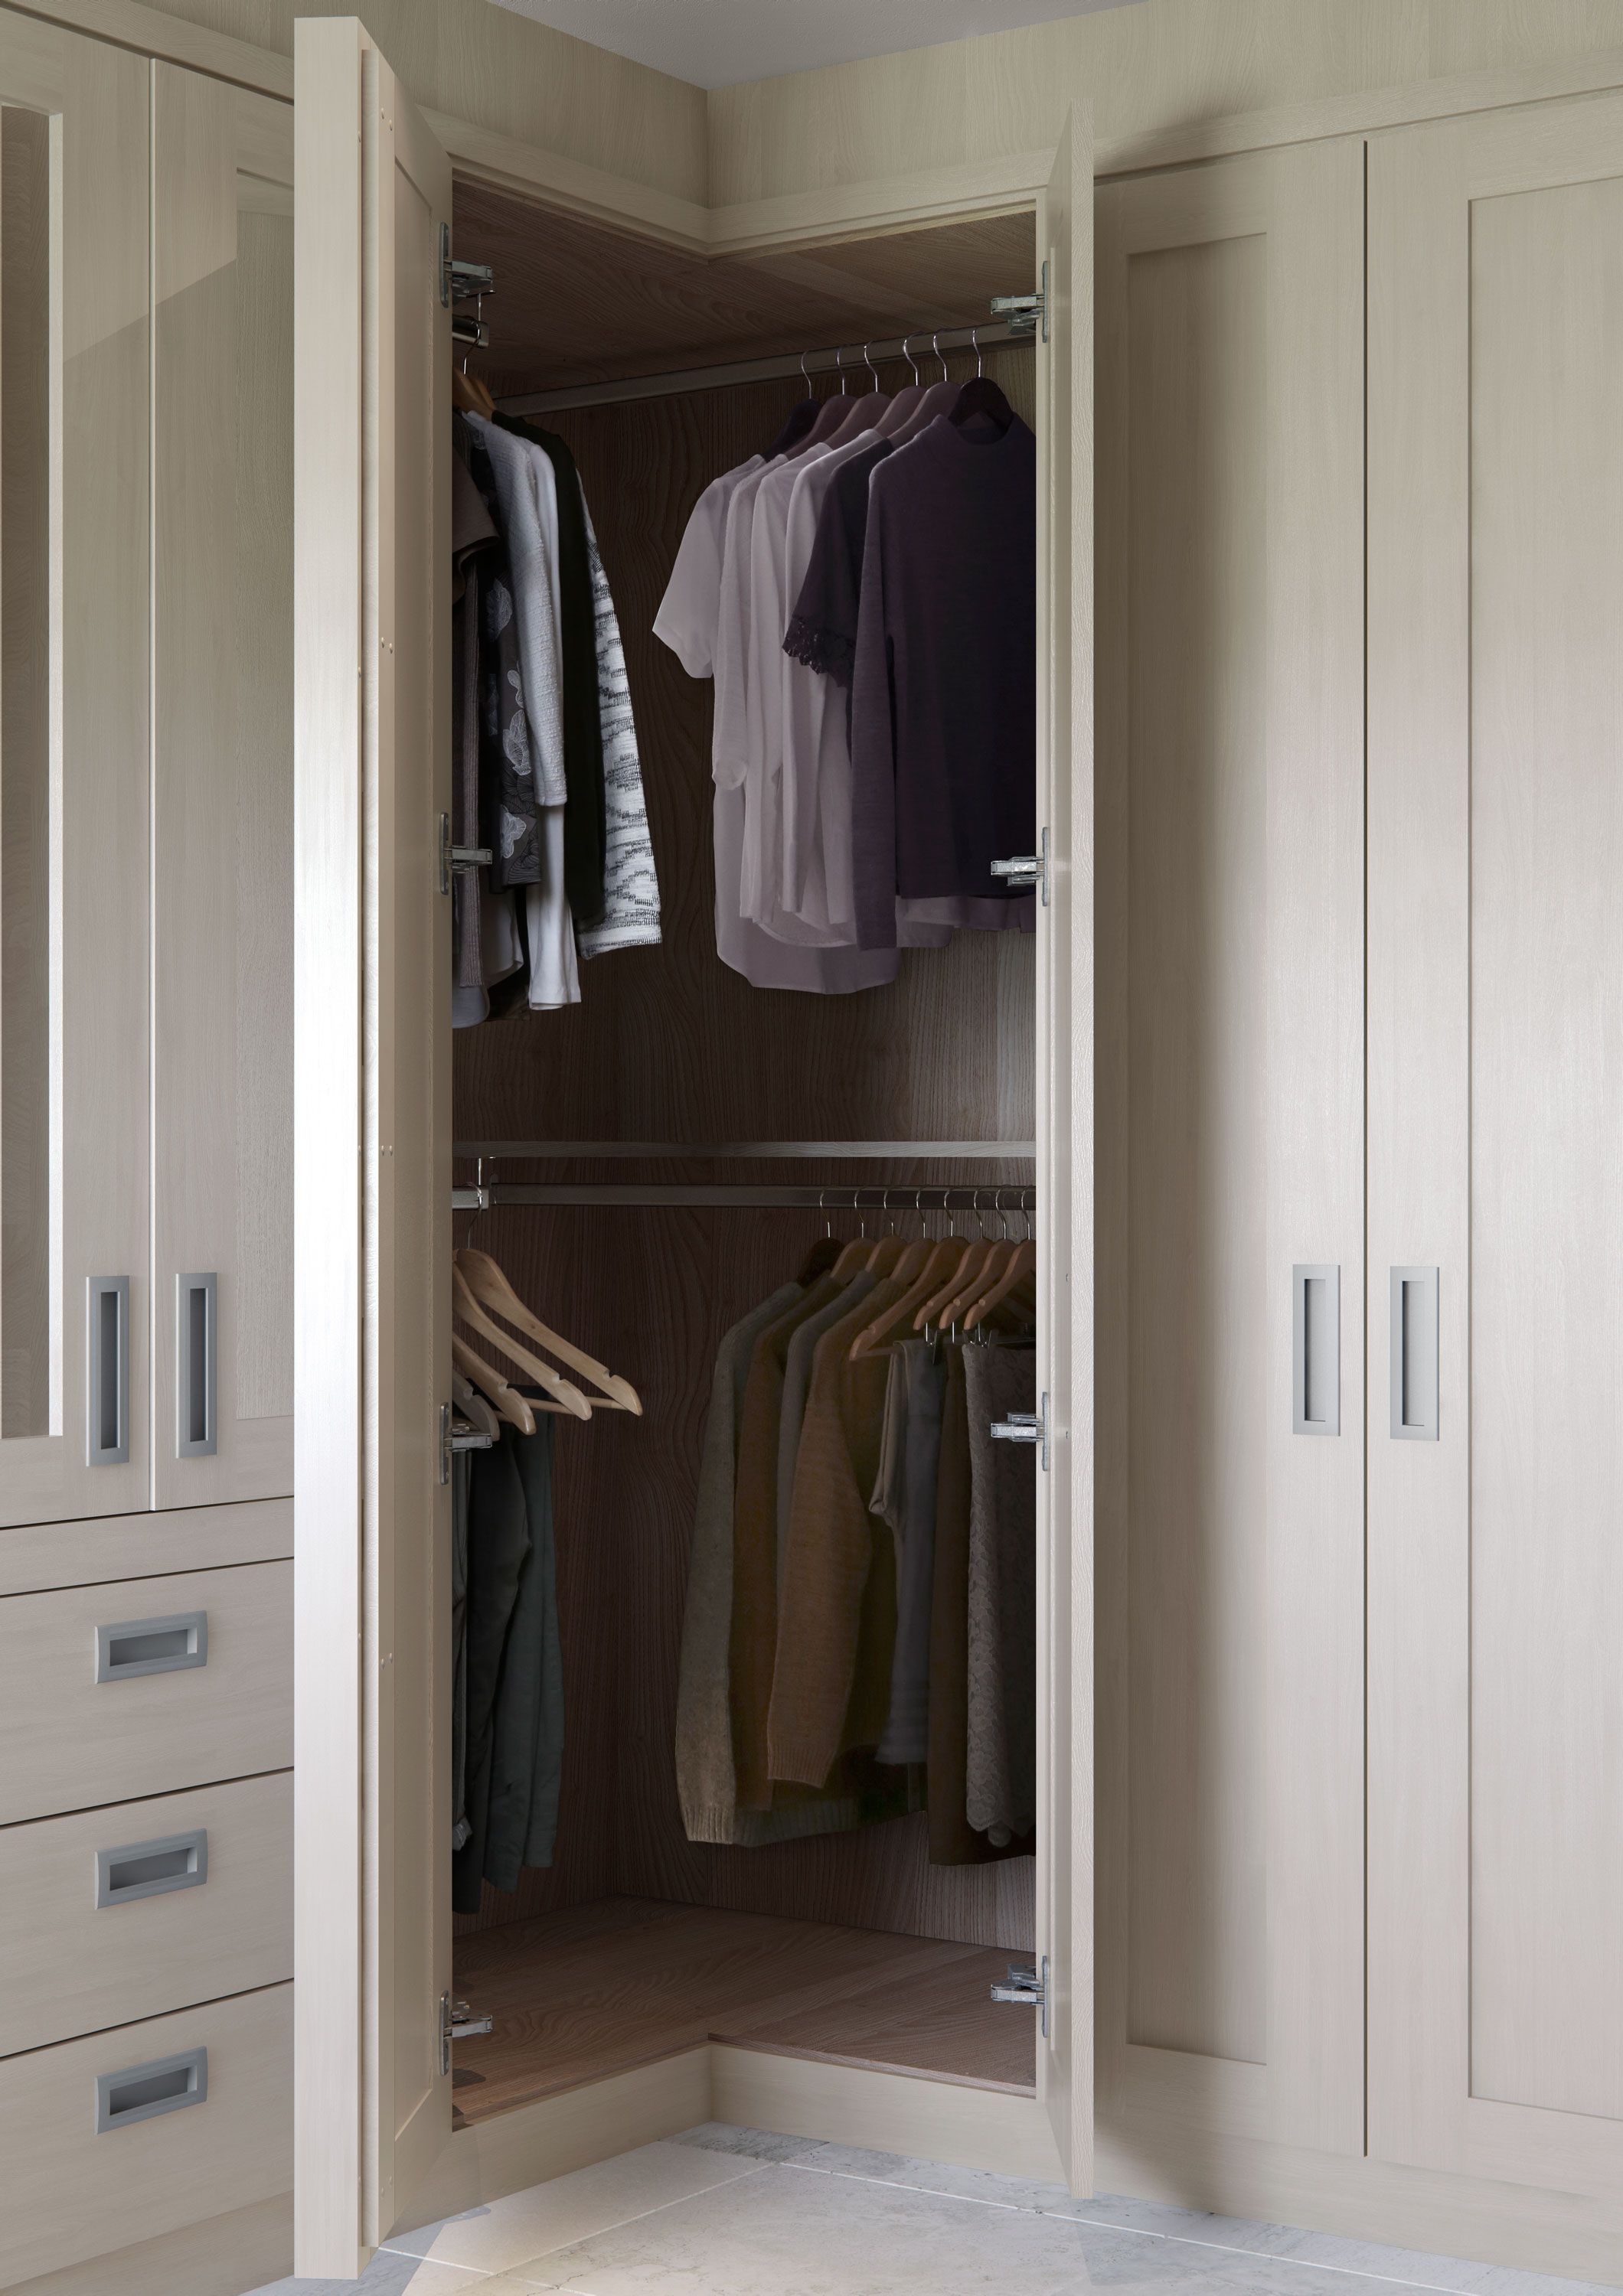 Make The Most Of The Corner Space With This Angled Double Hanging Rail. |  Corner Wardrobe, Corner Wardrobe Closet, Bedroom Built In Wardrobe Intended For Double Rail Wardrobes With Drawers (Photo 10 of 15)